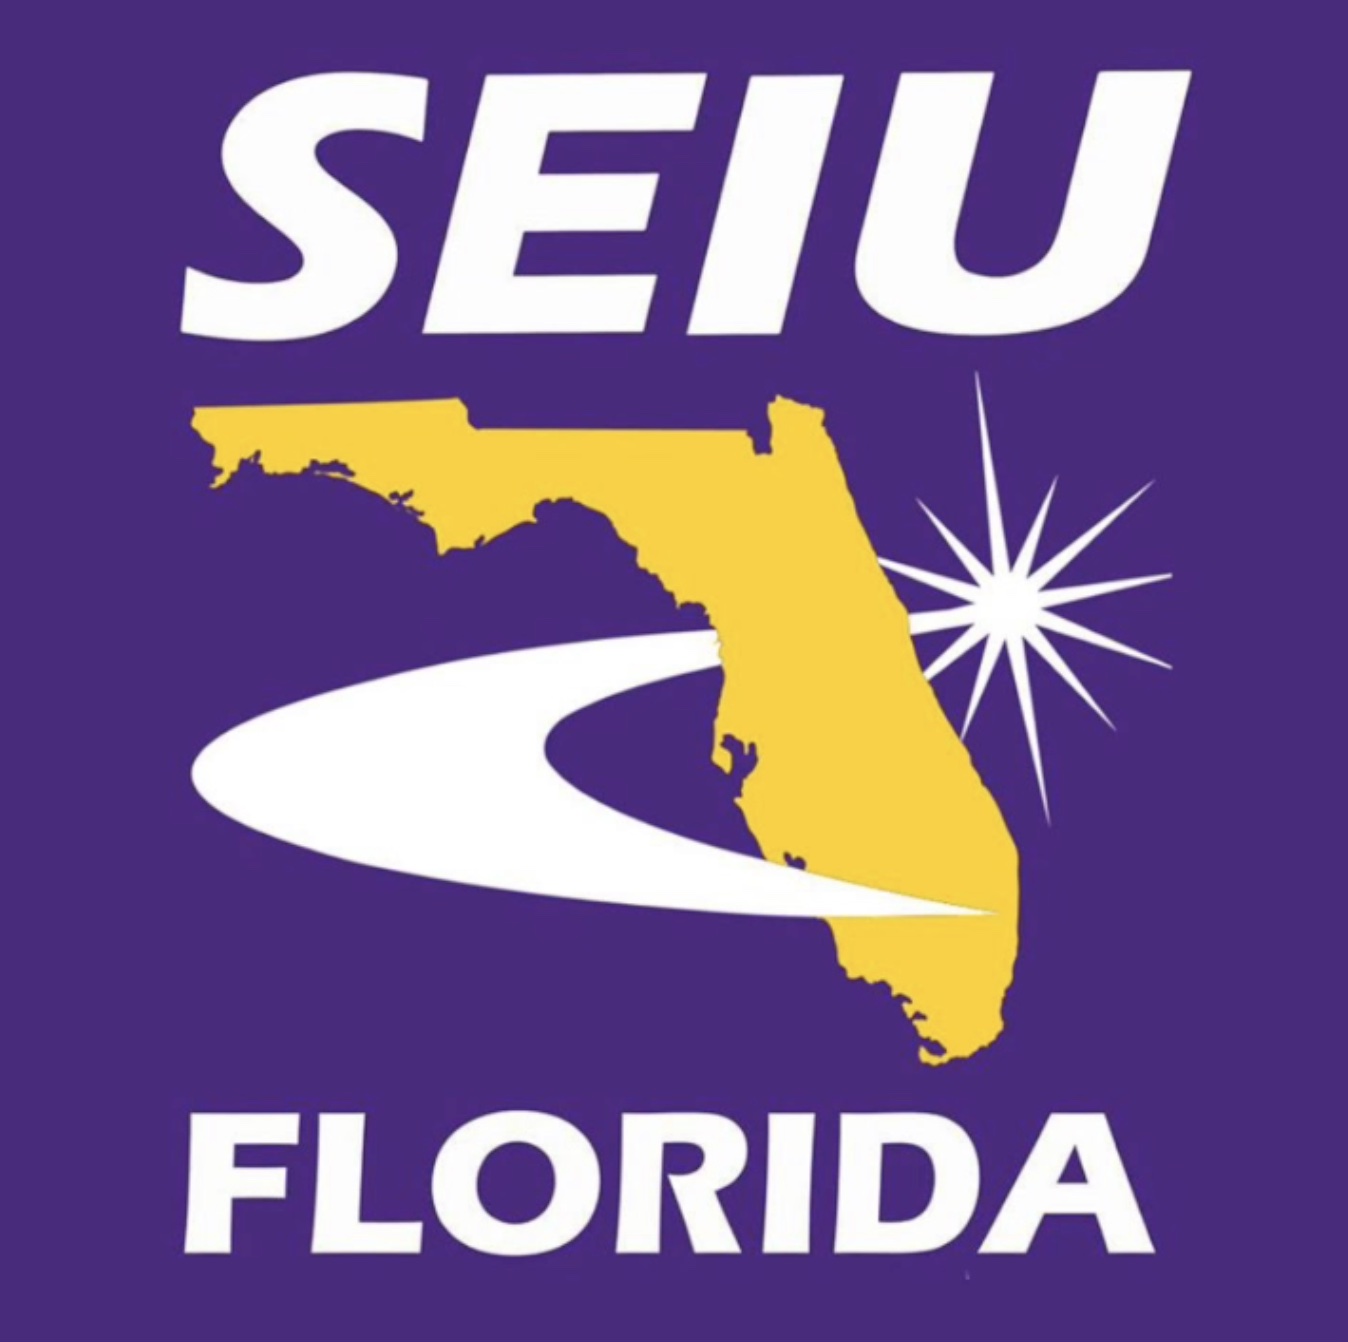 Logo for SEIU Florida. Purple background with yellow Florida shape in middle.